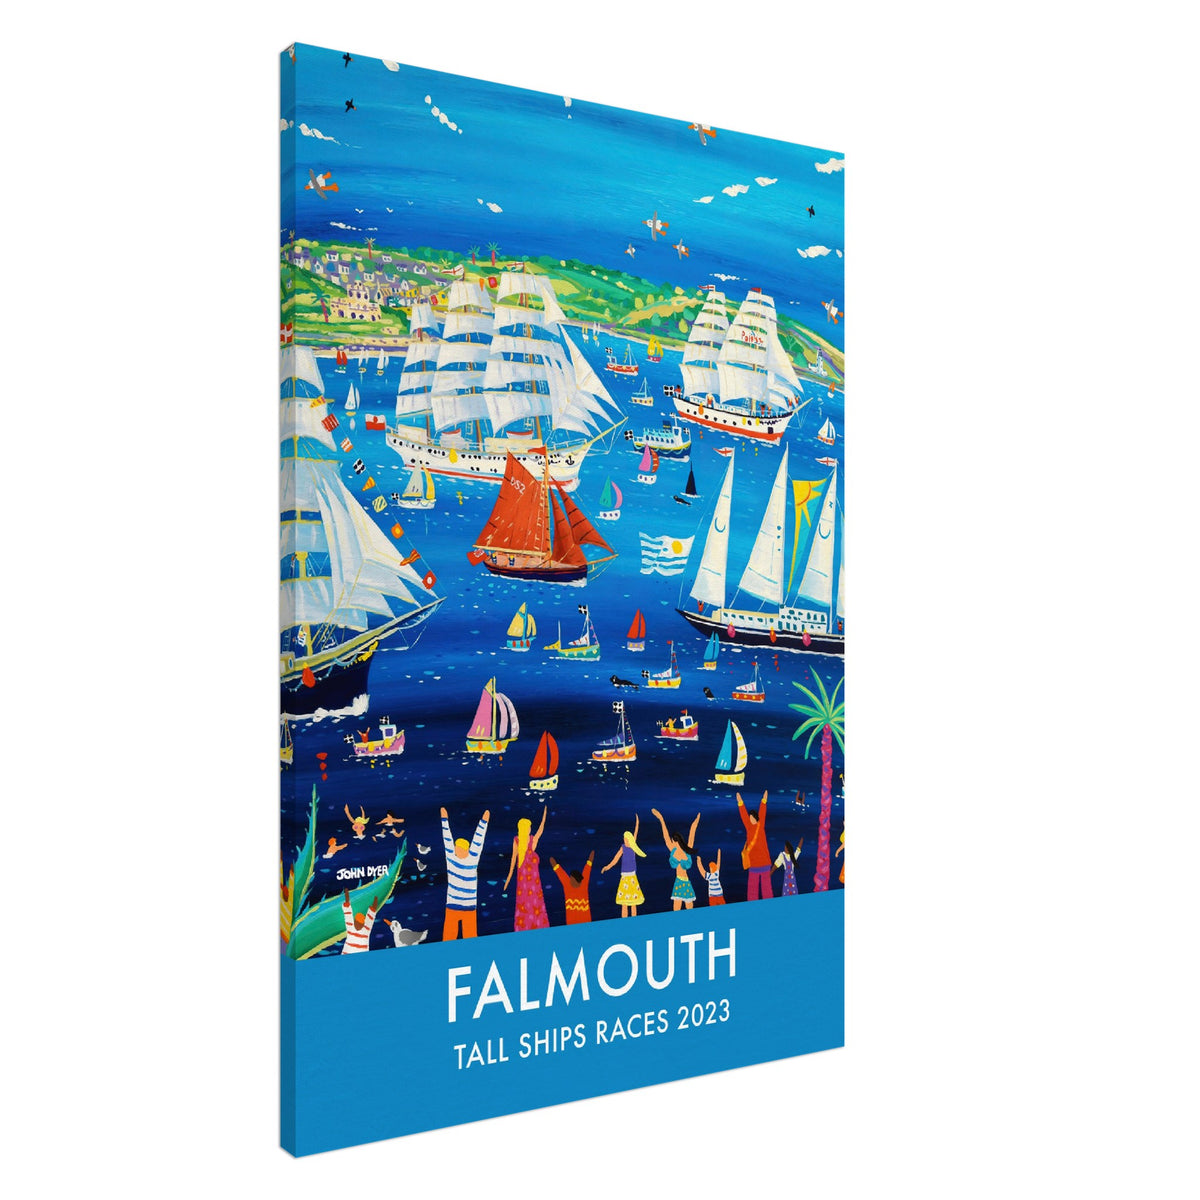 Canvas Art Print by John Dyer of the Falmouth Tall Ships Races 2023 from our Cornwall Art Gallery